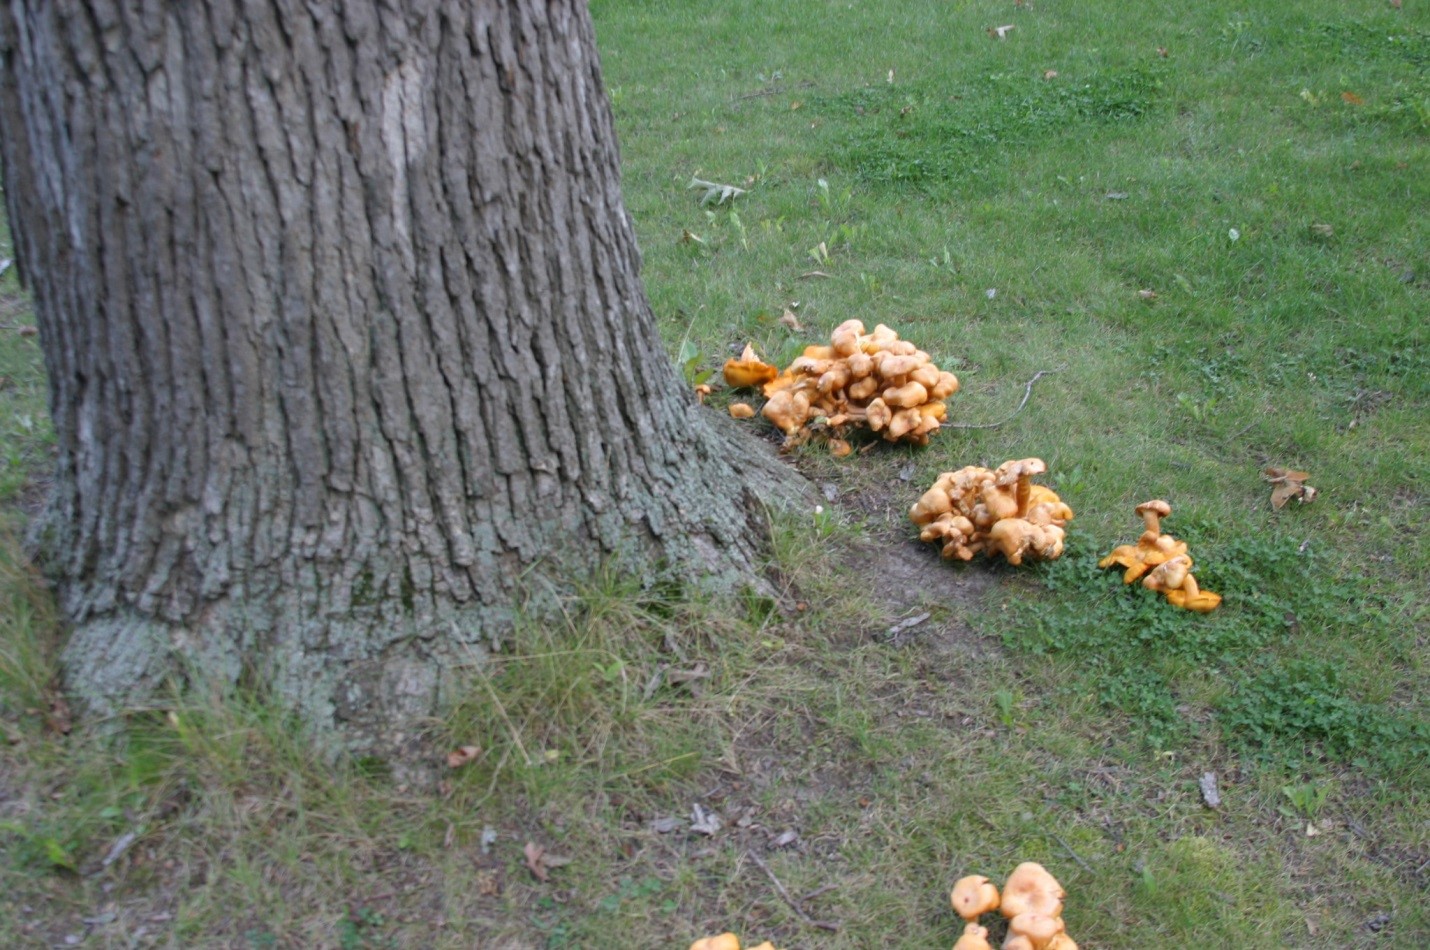 Photograph 1. A potential root and butt decay fungus fruiting on the ground near the base of a white oak.